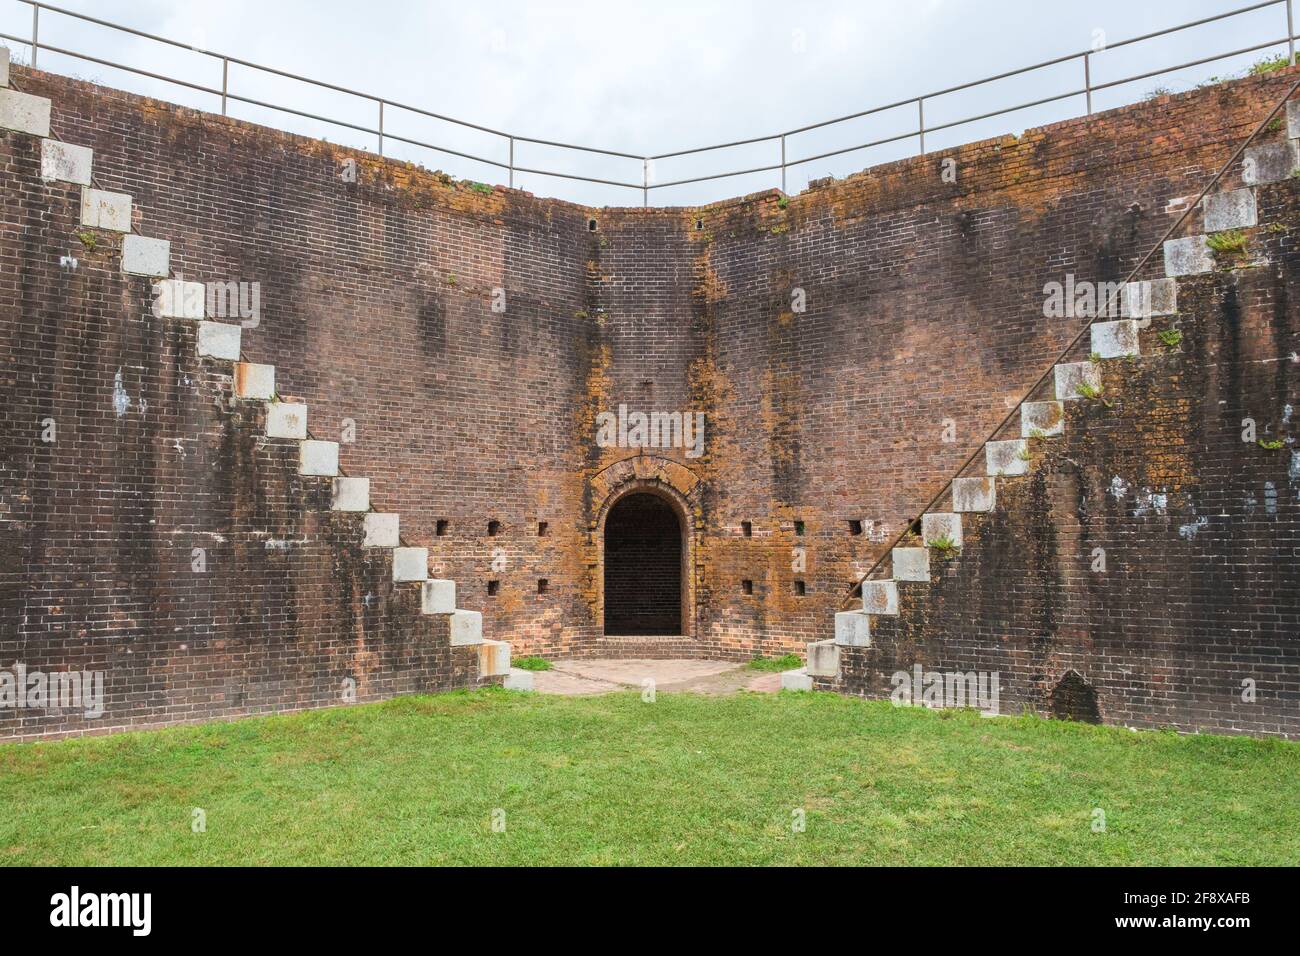 GULF SHORES, AL, USA - MARCH 28, 2021: Interior corner of Fort Morgan with arched doorway and stairs Stock Photo